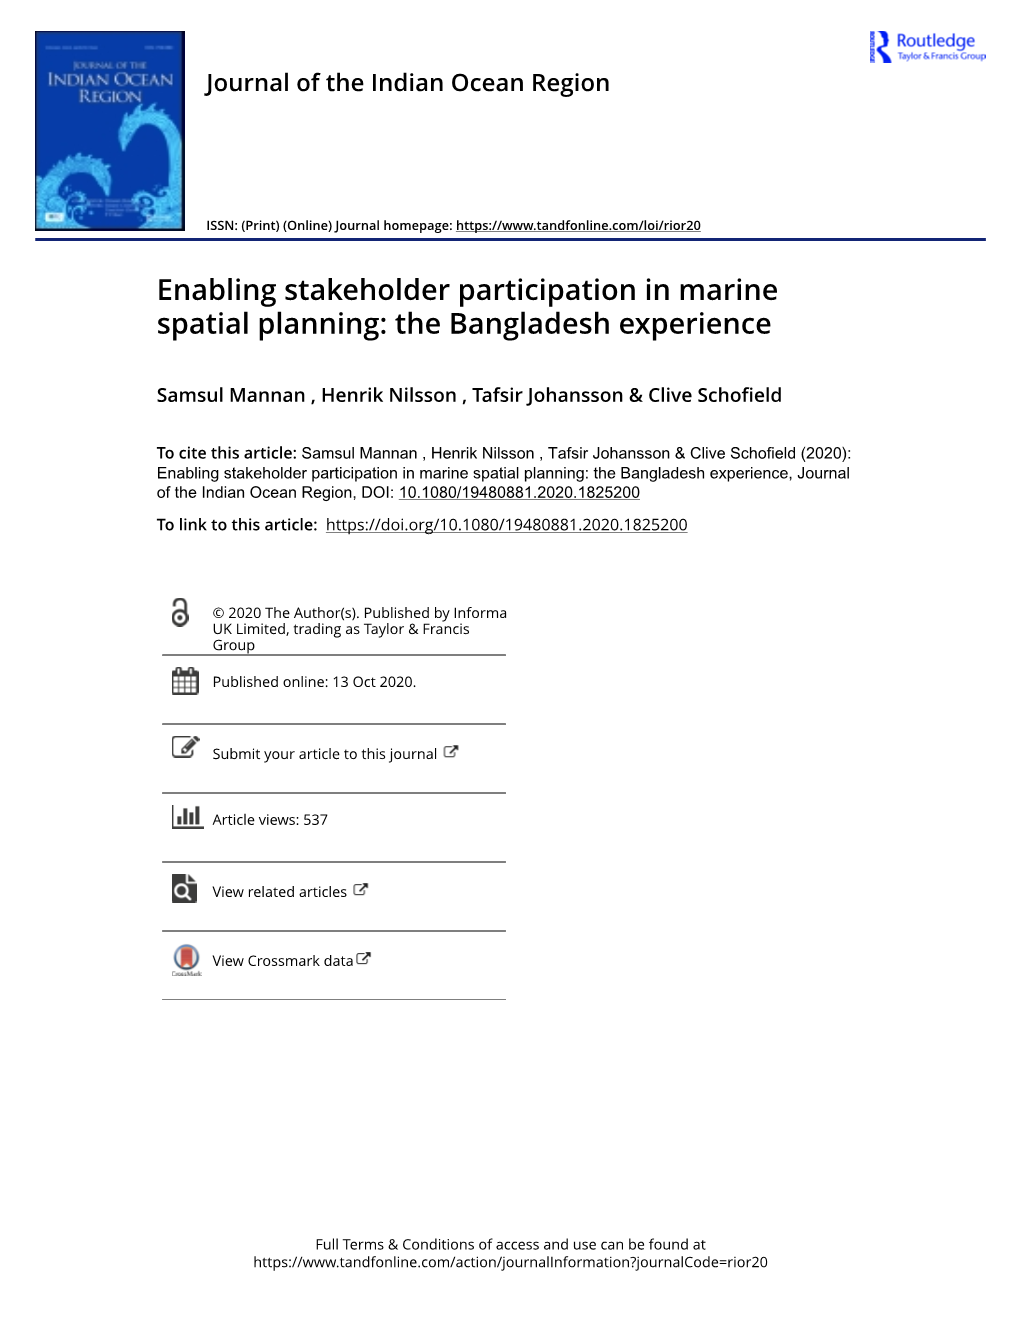 Enabling Stakeholder Participation in Marine Spatial Planning: the Bangladesh Experience